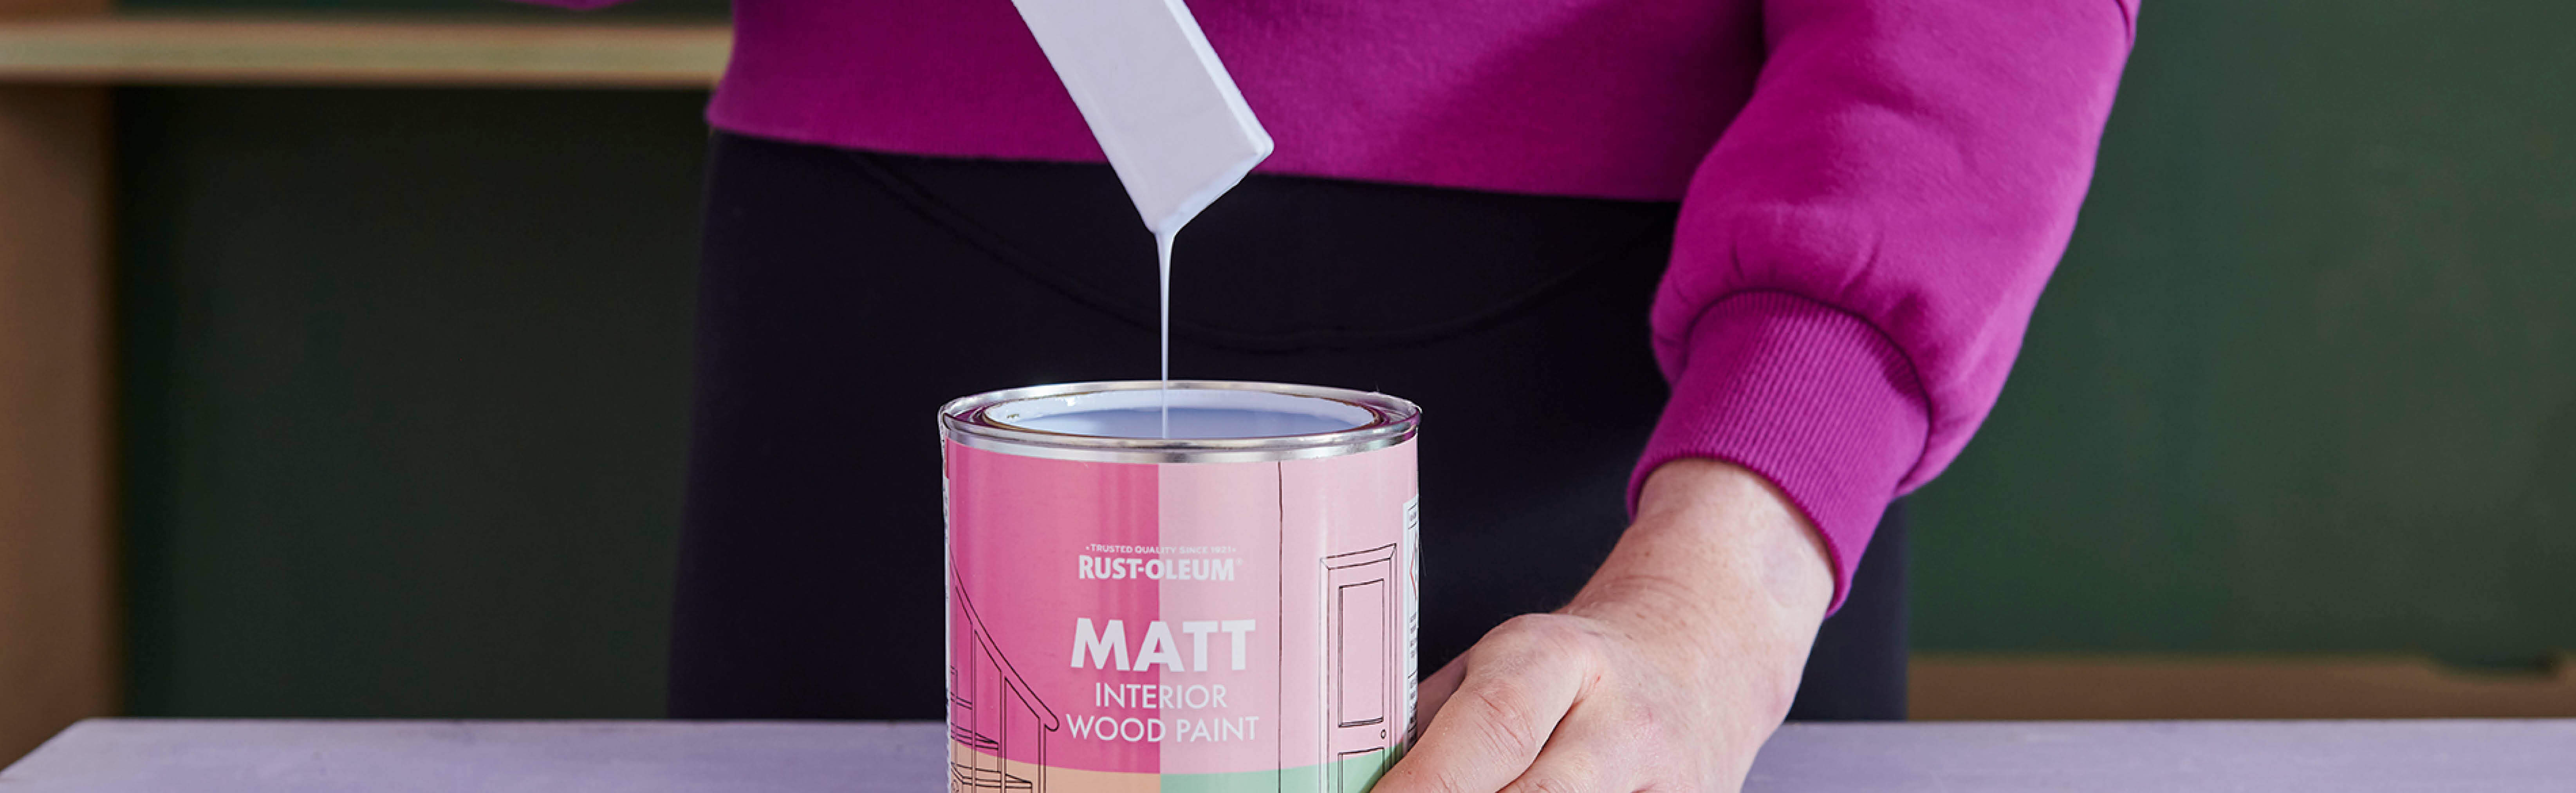 Stirring a can of Interior Wood Paint in Powder Blue